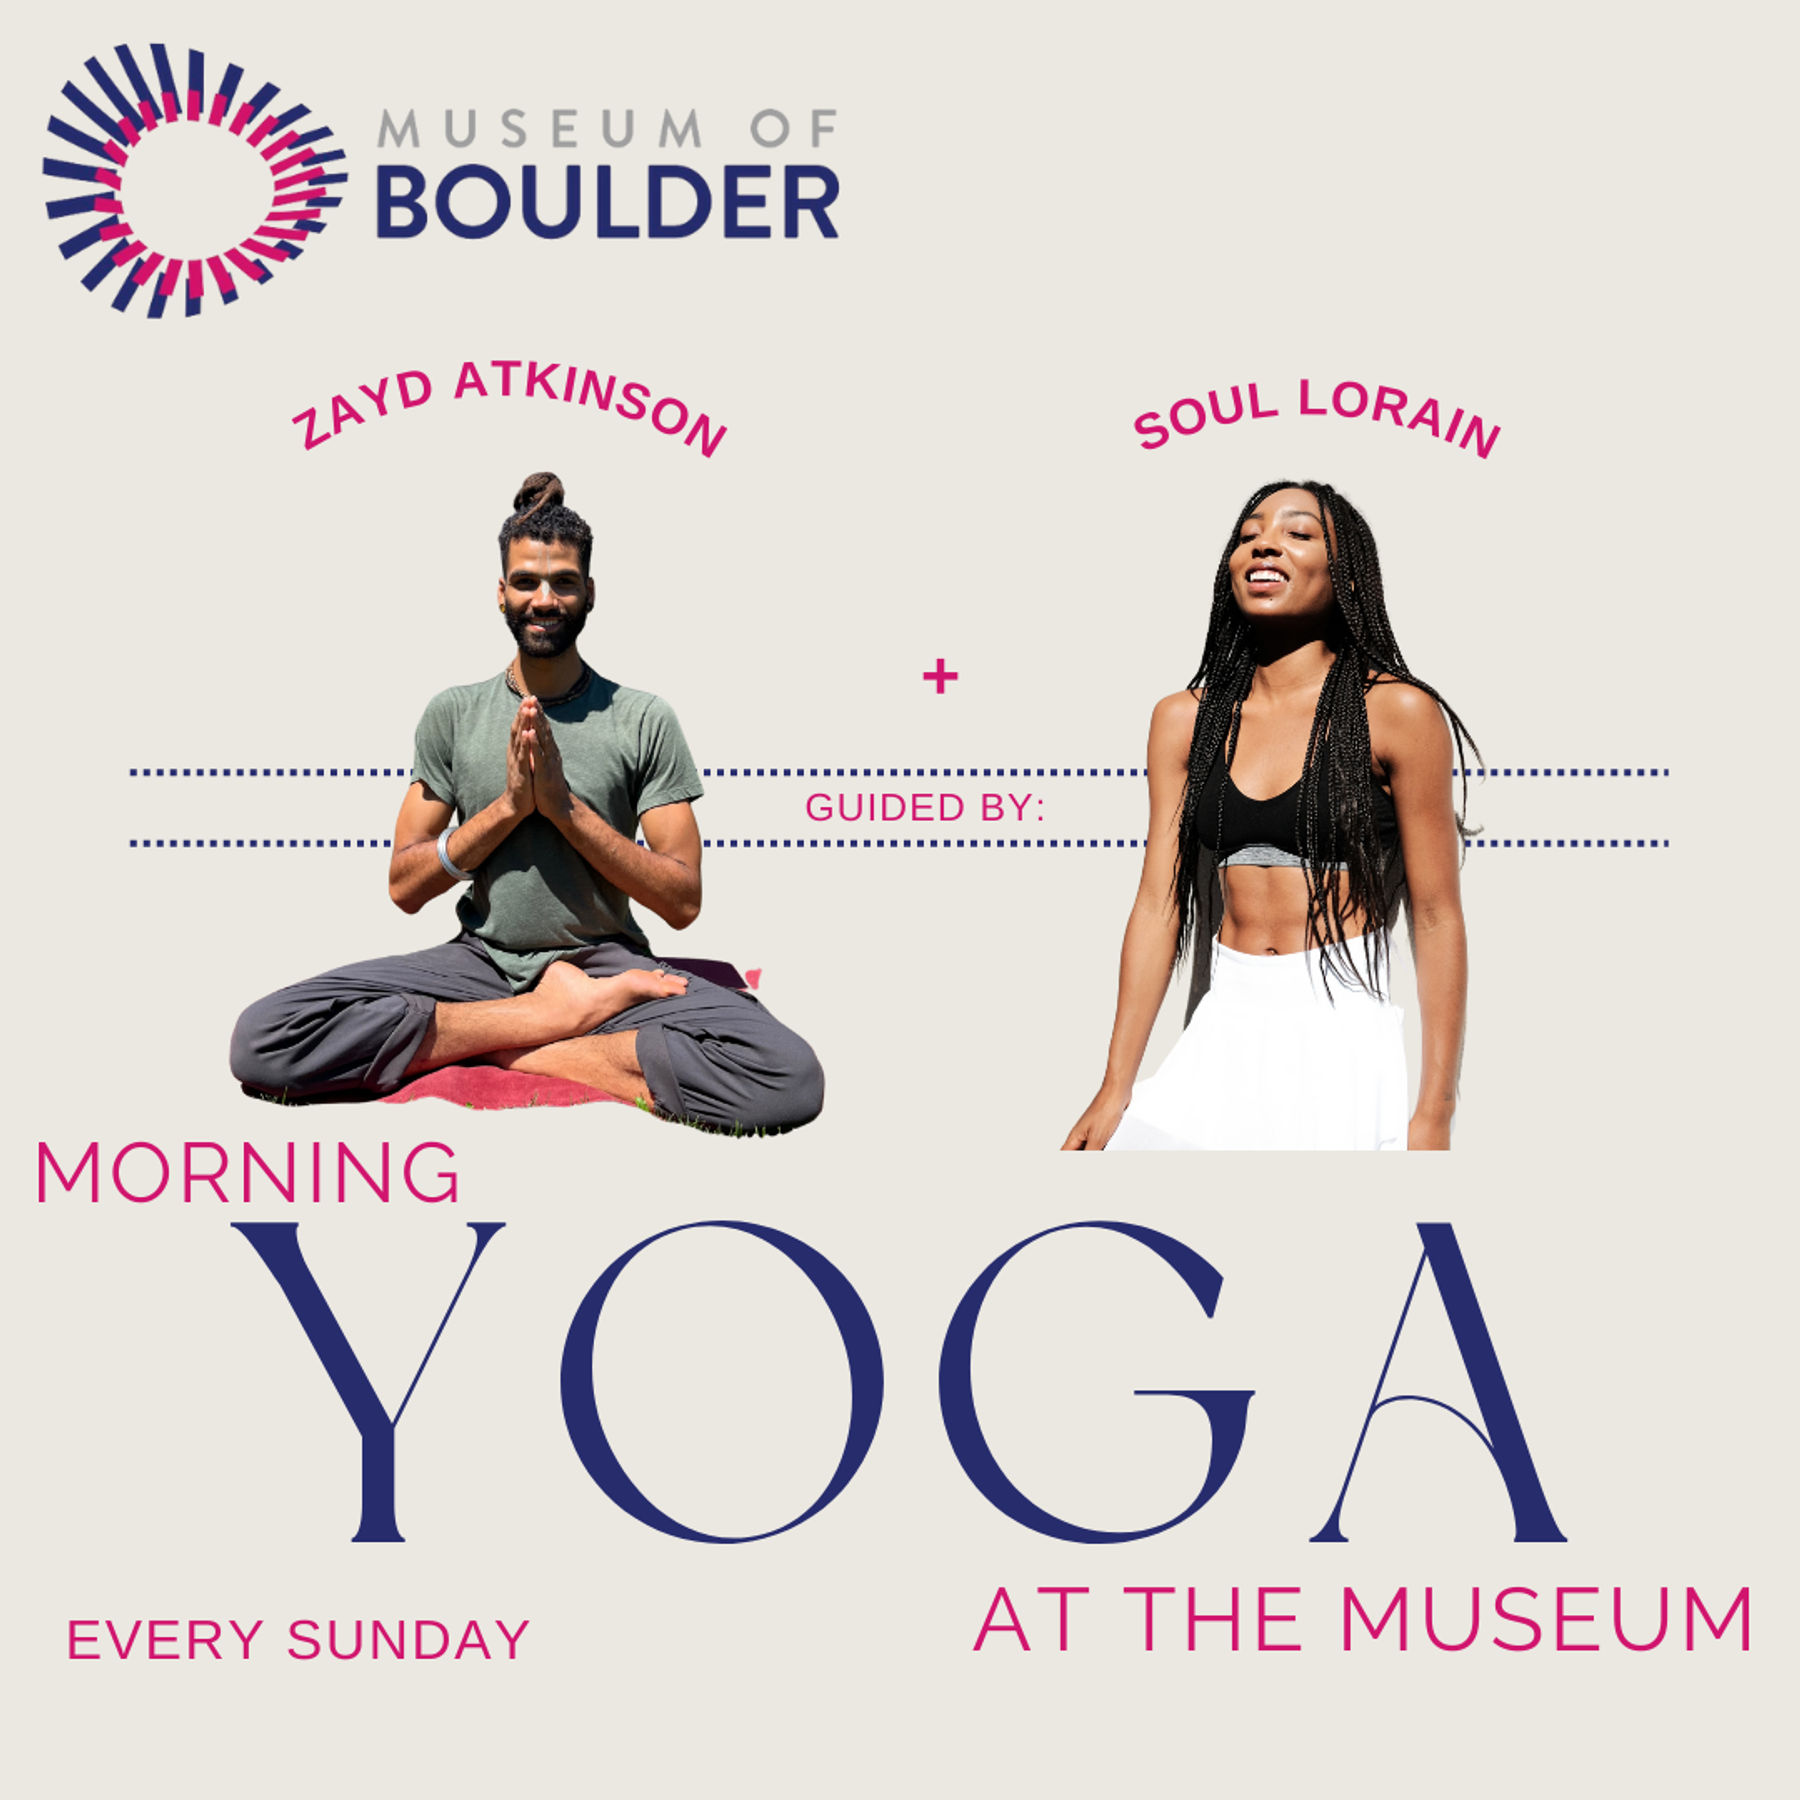 Morning Yoga at the Museum